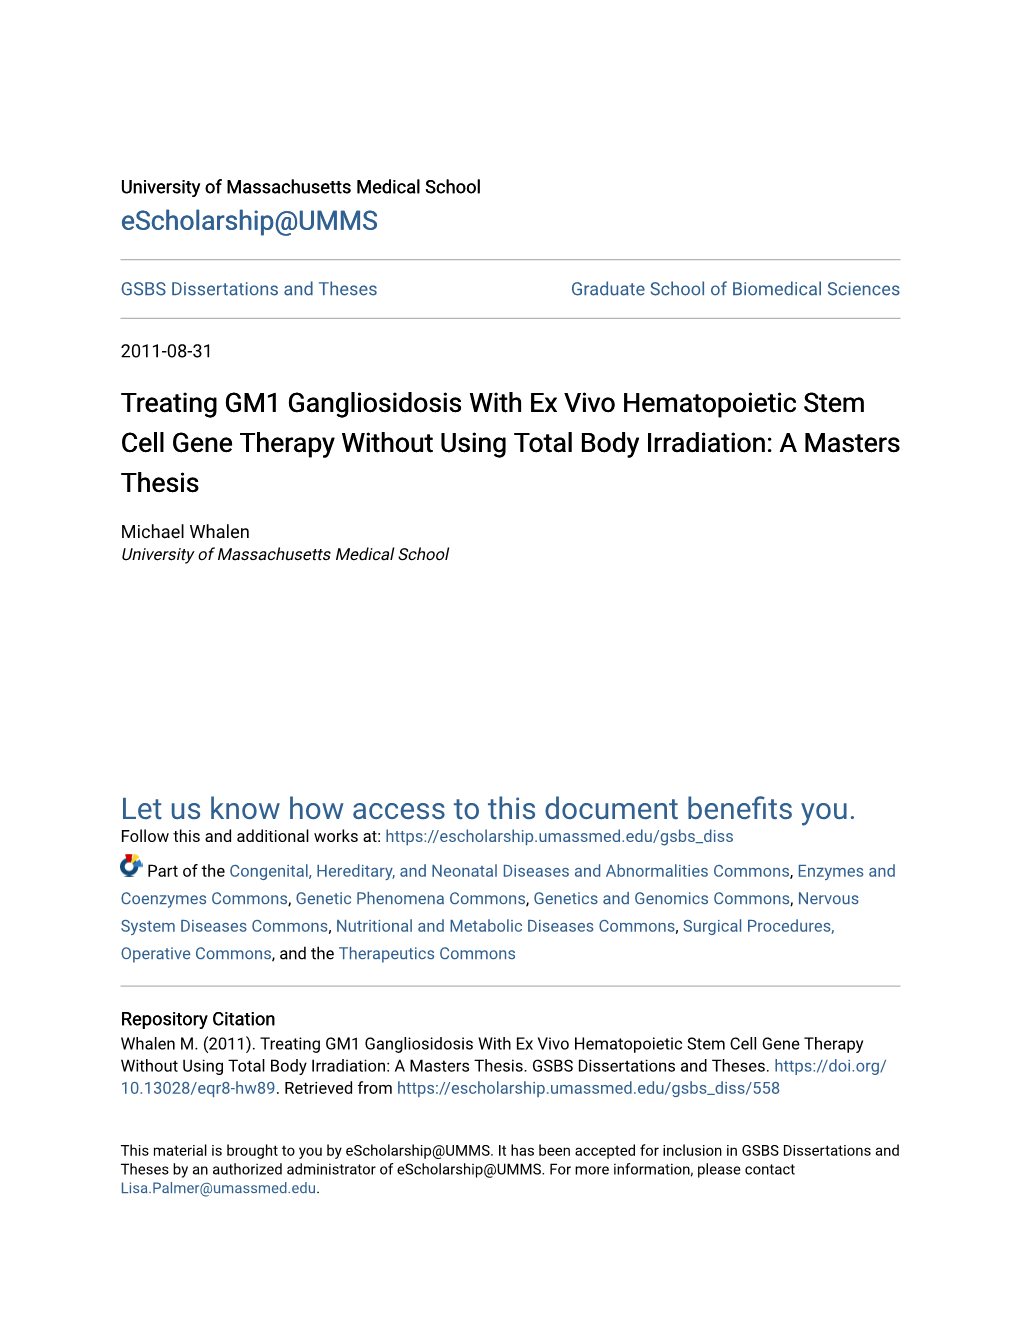 Treating GM1 Gangliosidosis with Ex Vivo Hematopoietic Stem Cell Gene Therapy Without Using Total Body Irradiation: a Masters Thesis